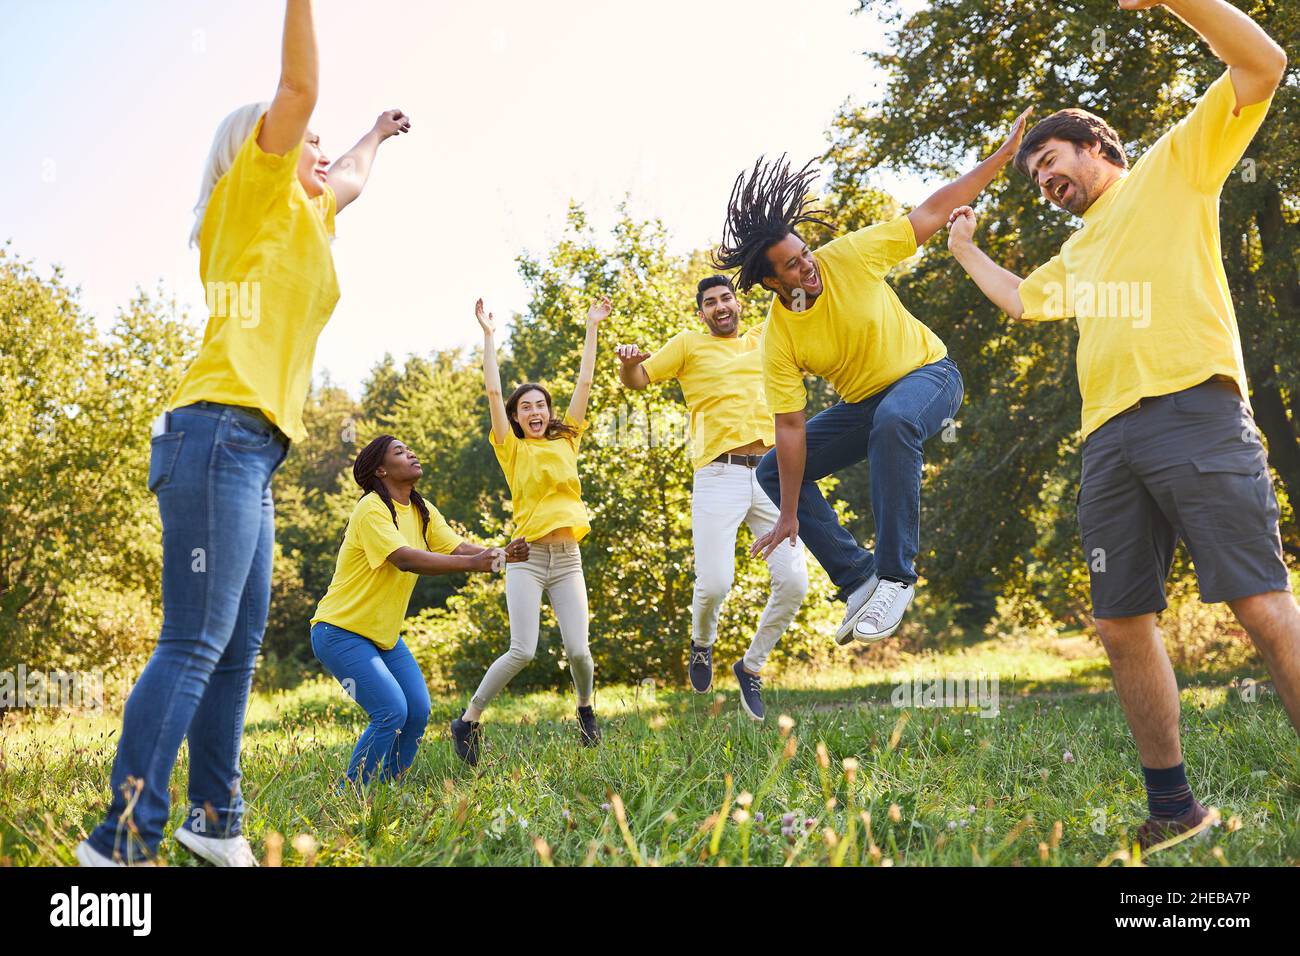 Young people jump together in the air on a meadow for motivation and team building Stock Photo